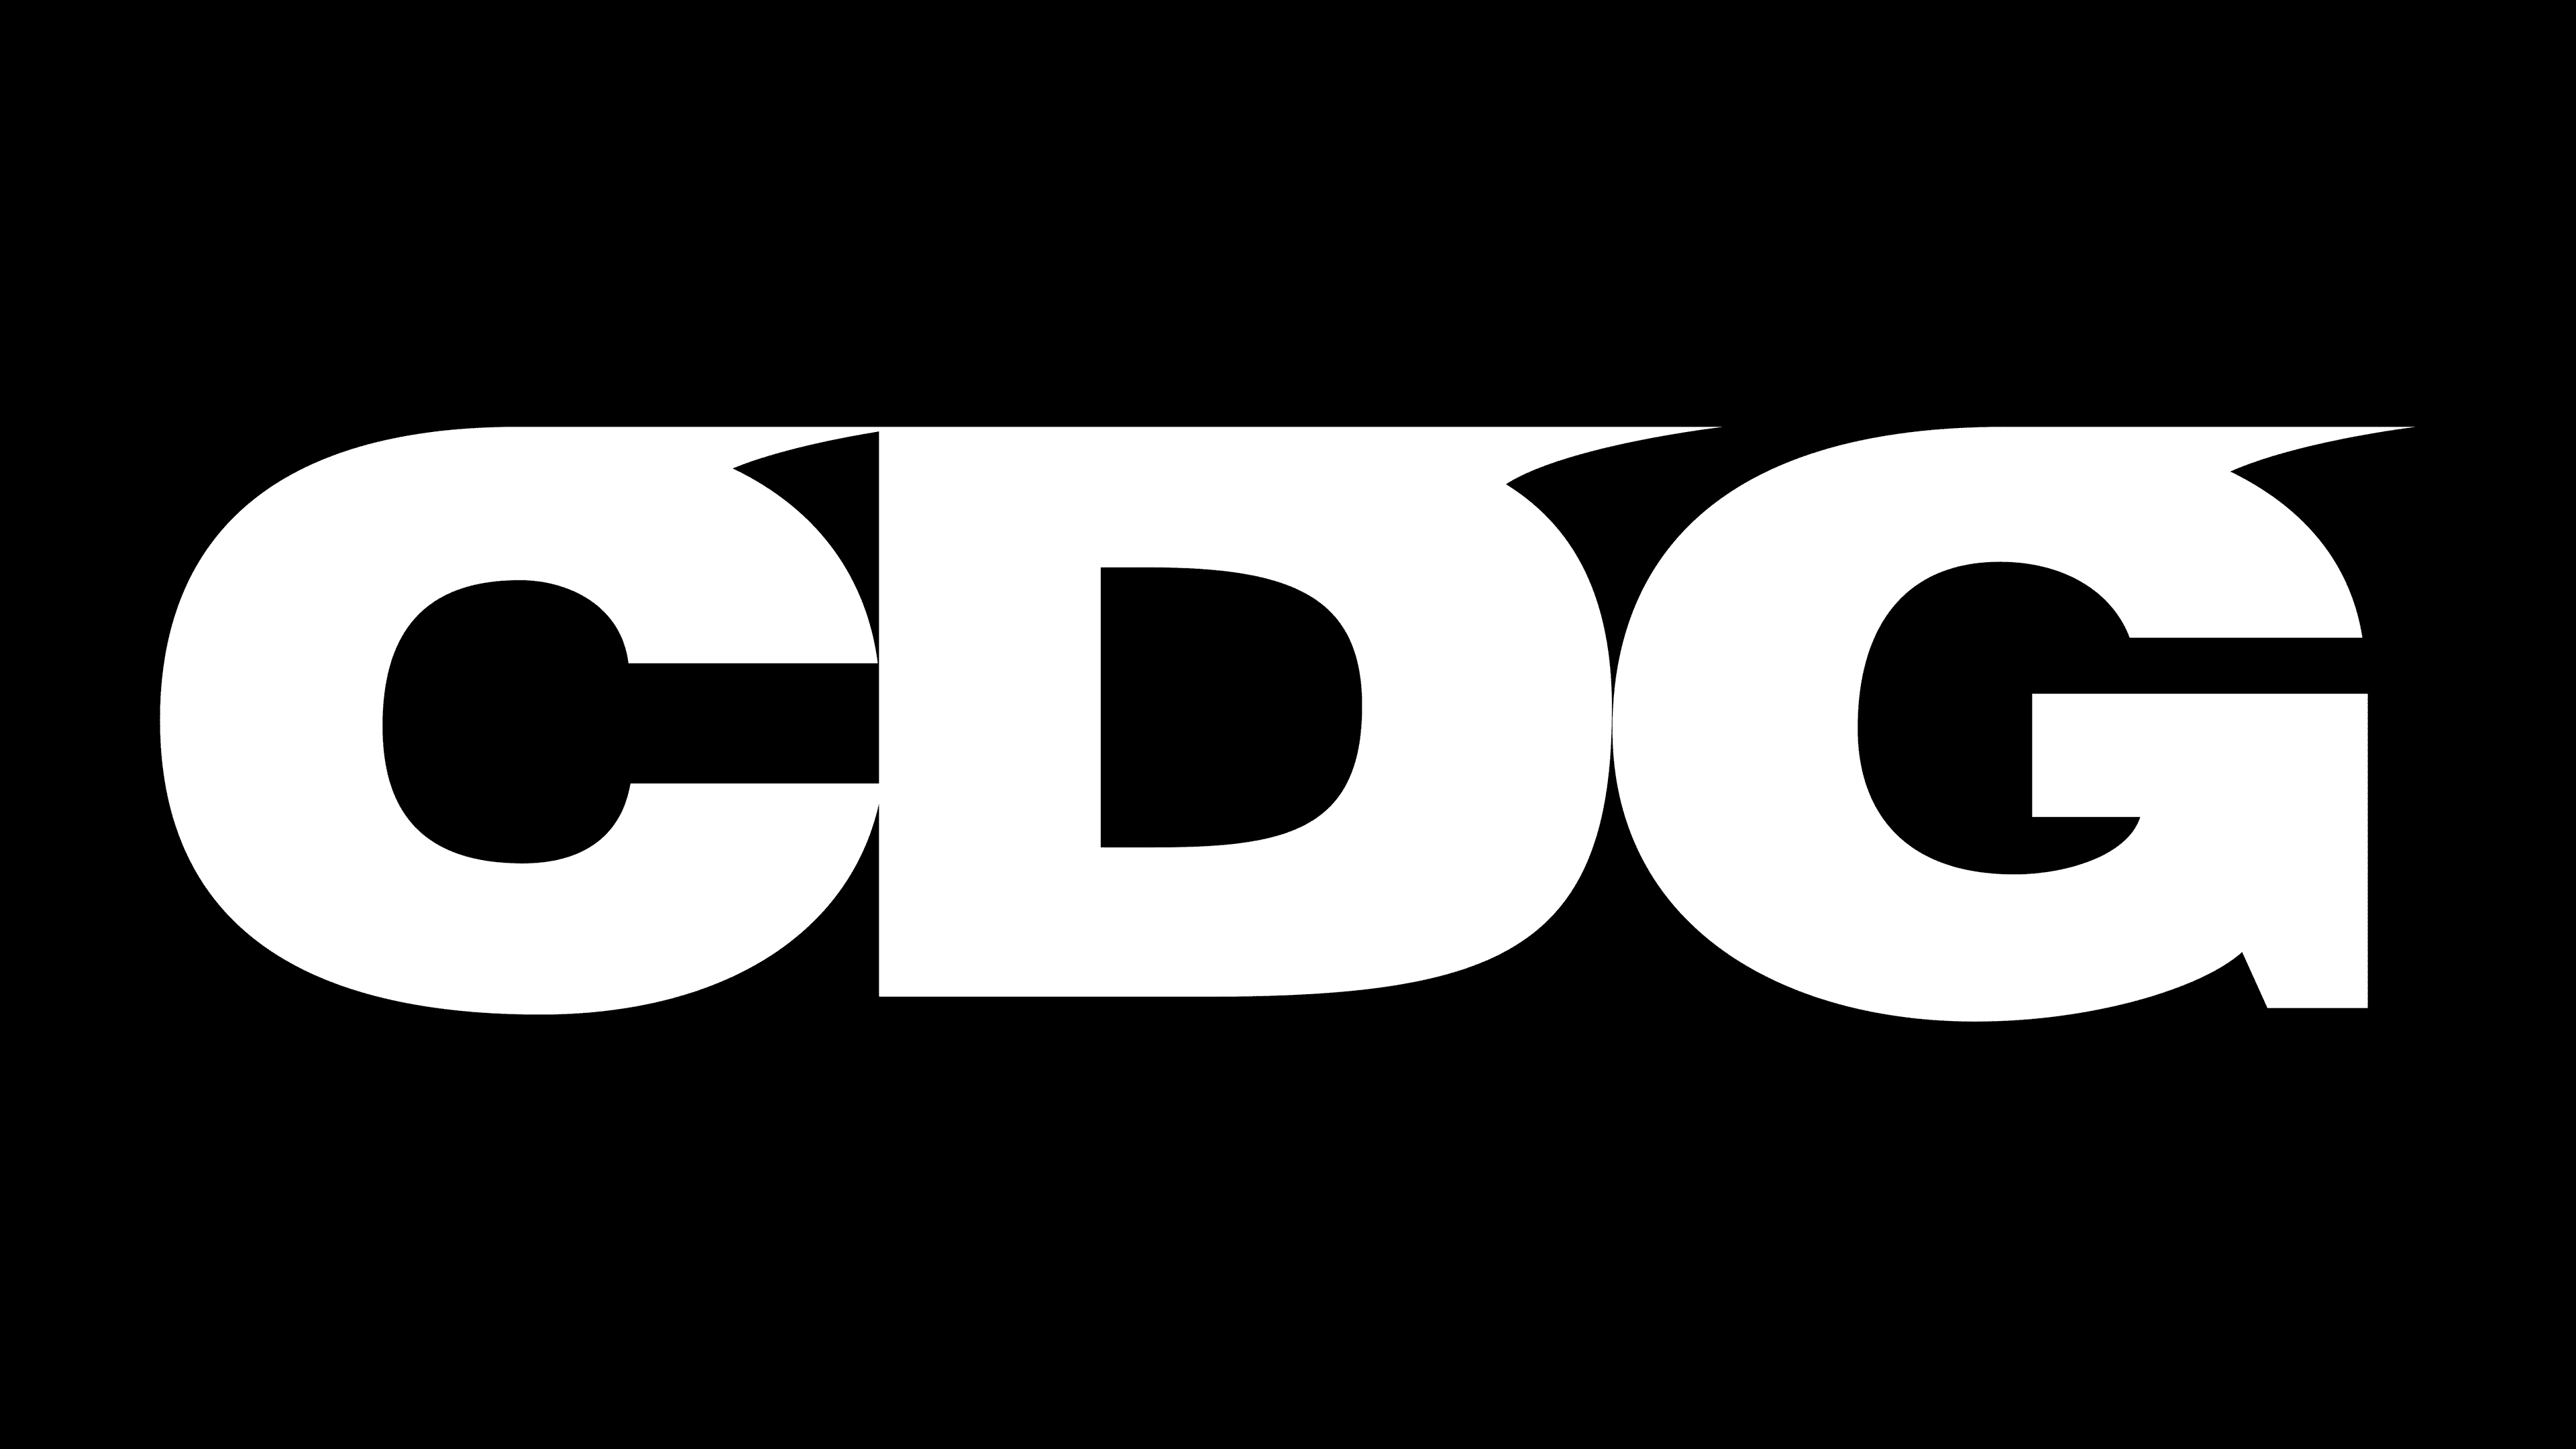 CDG Logo, symbol, meaning, history, PNG, brand